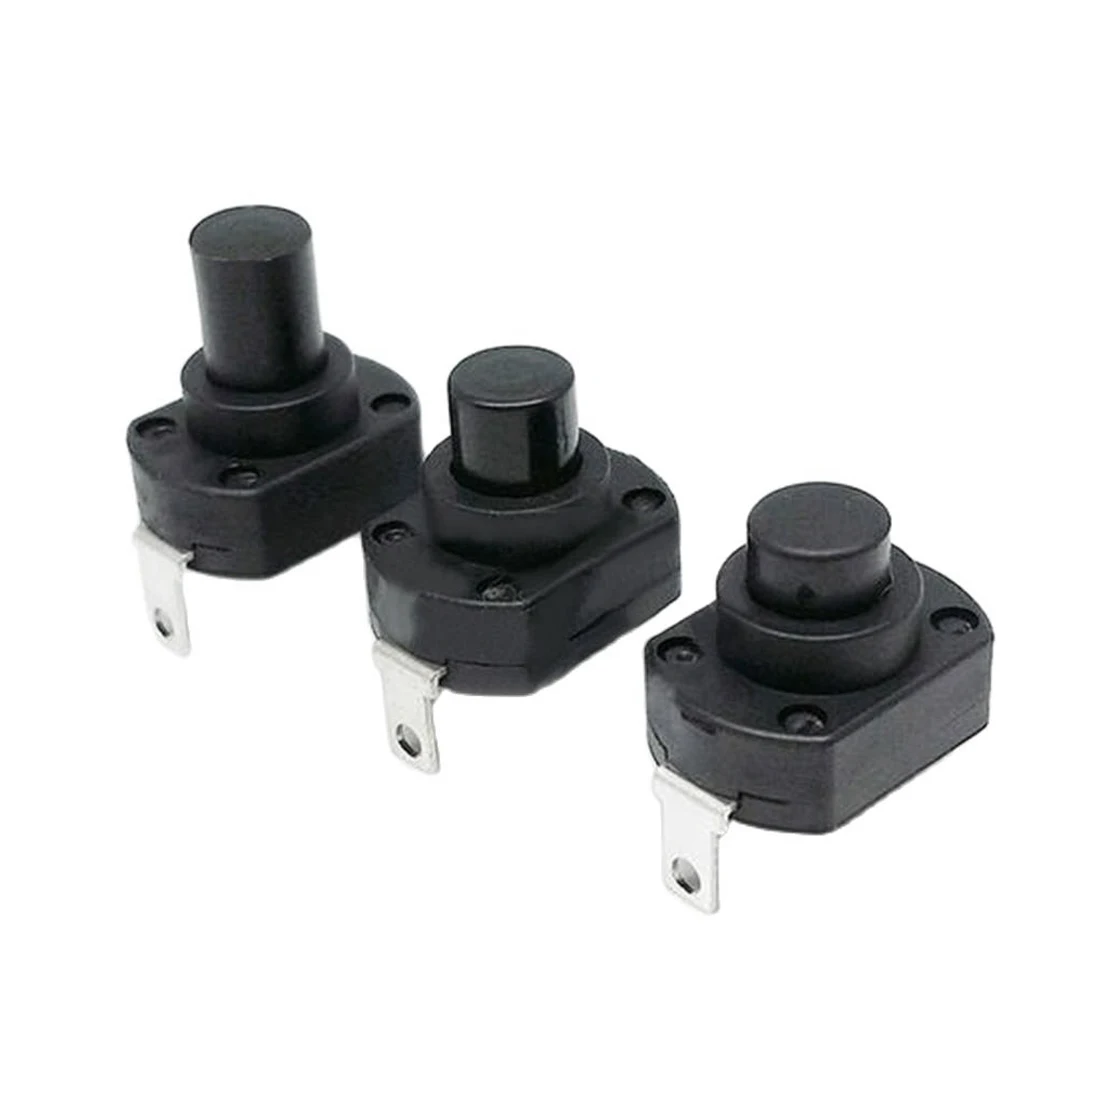 

10pcs Switch Flashlight Switches Self Locking Push Button Micro Power Buttons Key 3A/6A/10A Wholesale Price